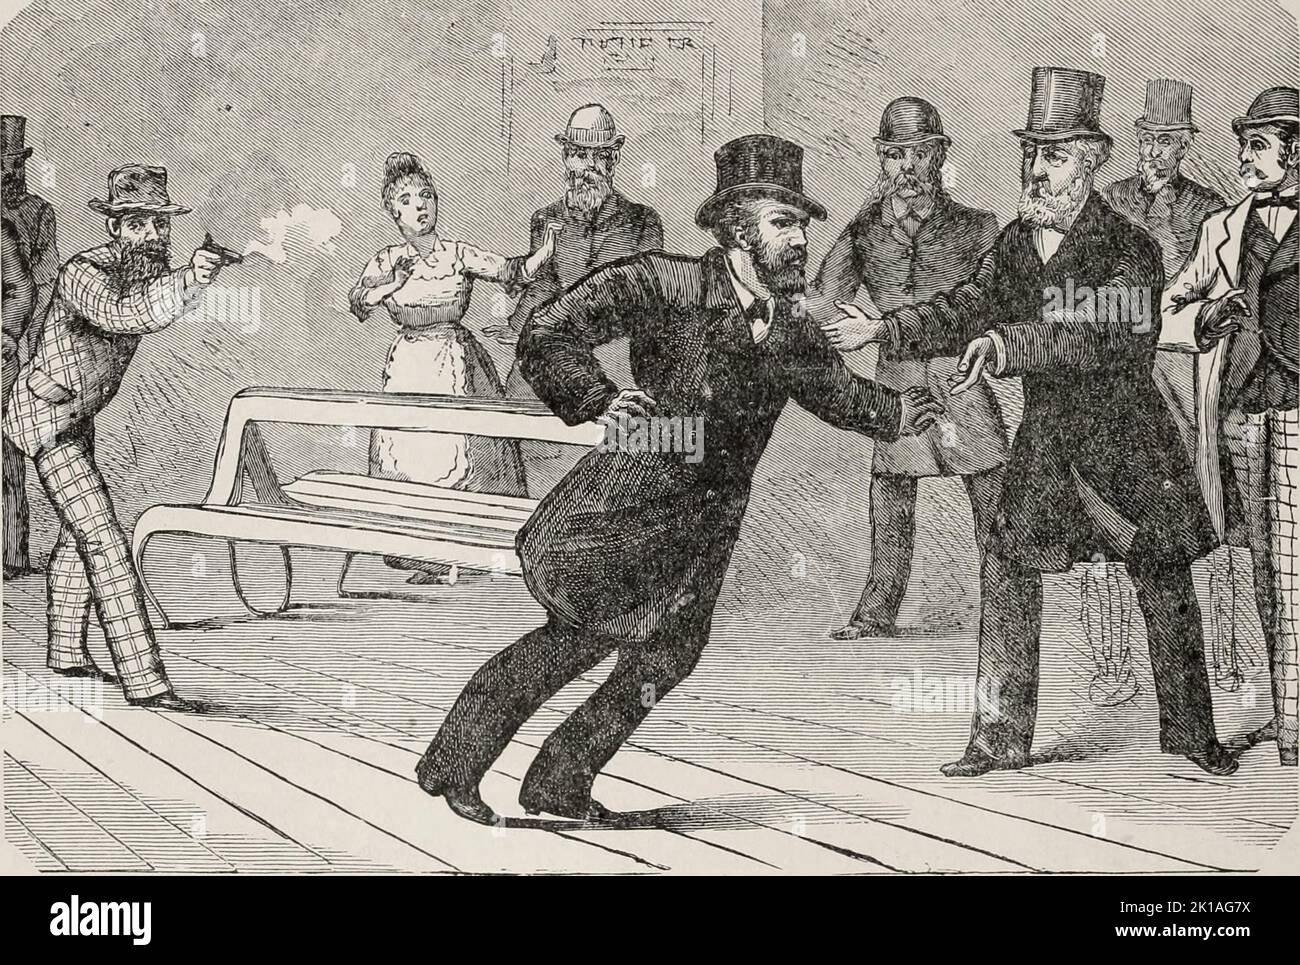 The assassination of president James Garfield by Charles Guiteau on July 2nd 1881. Garfield was not killed by the bullet but died, probably from sepsis, two months later on September 19th 1881. Stock Photo